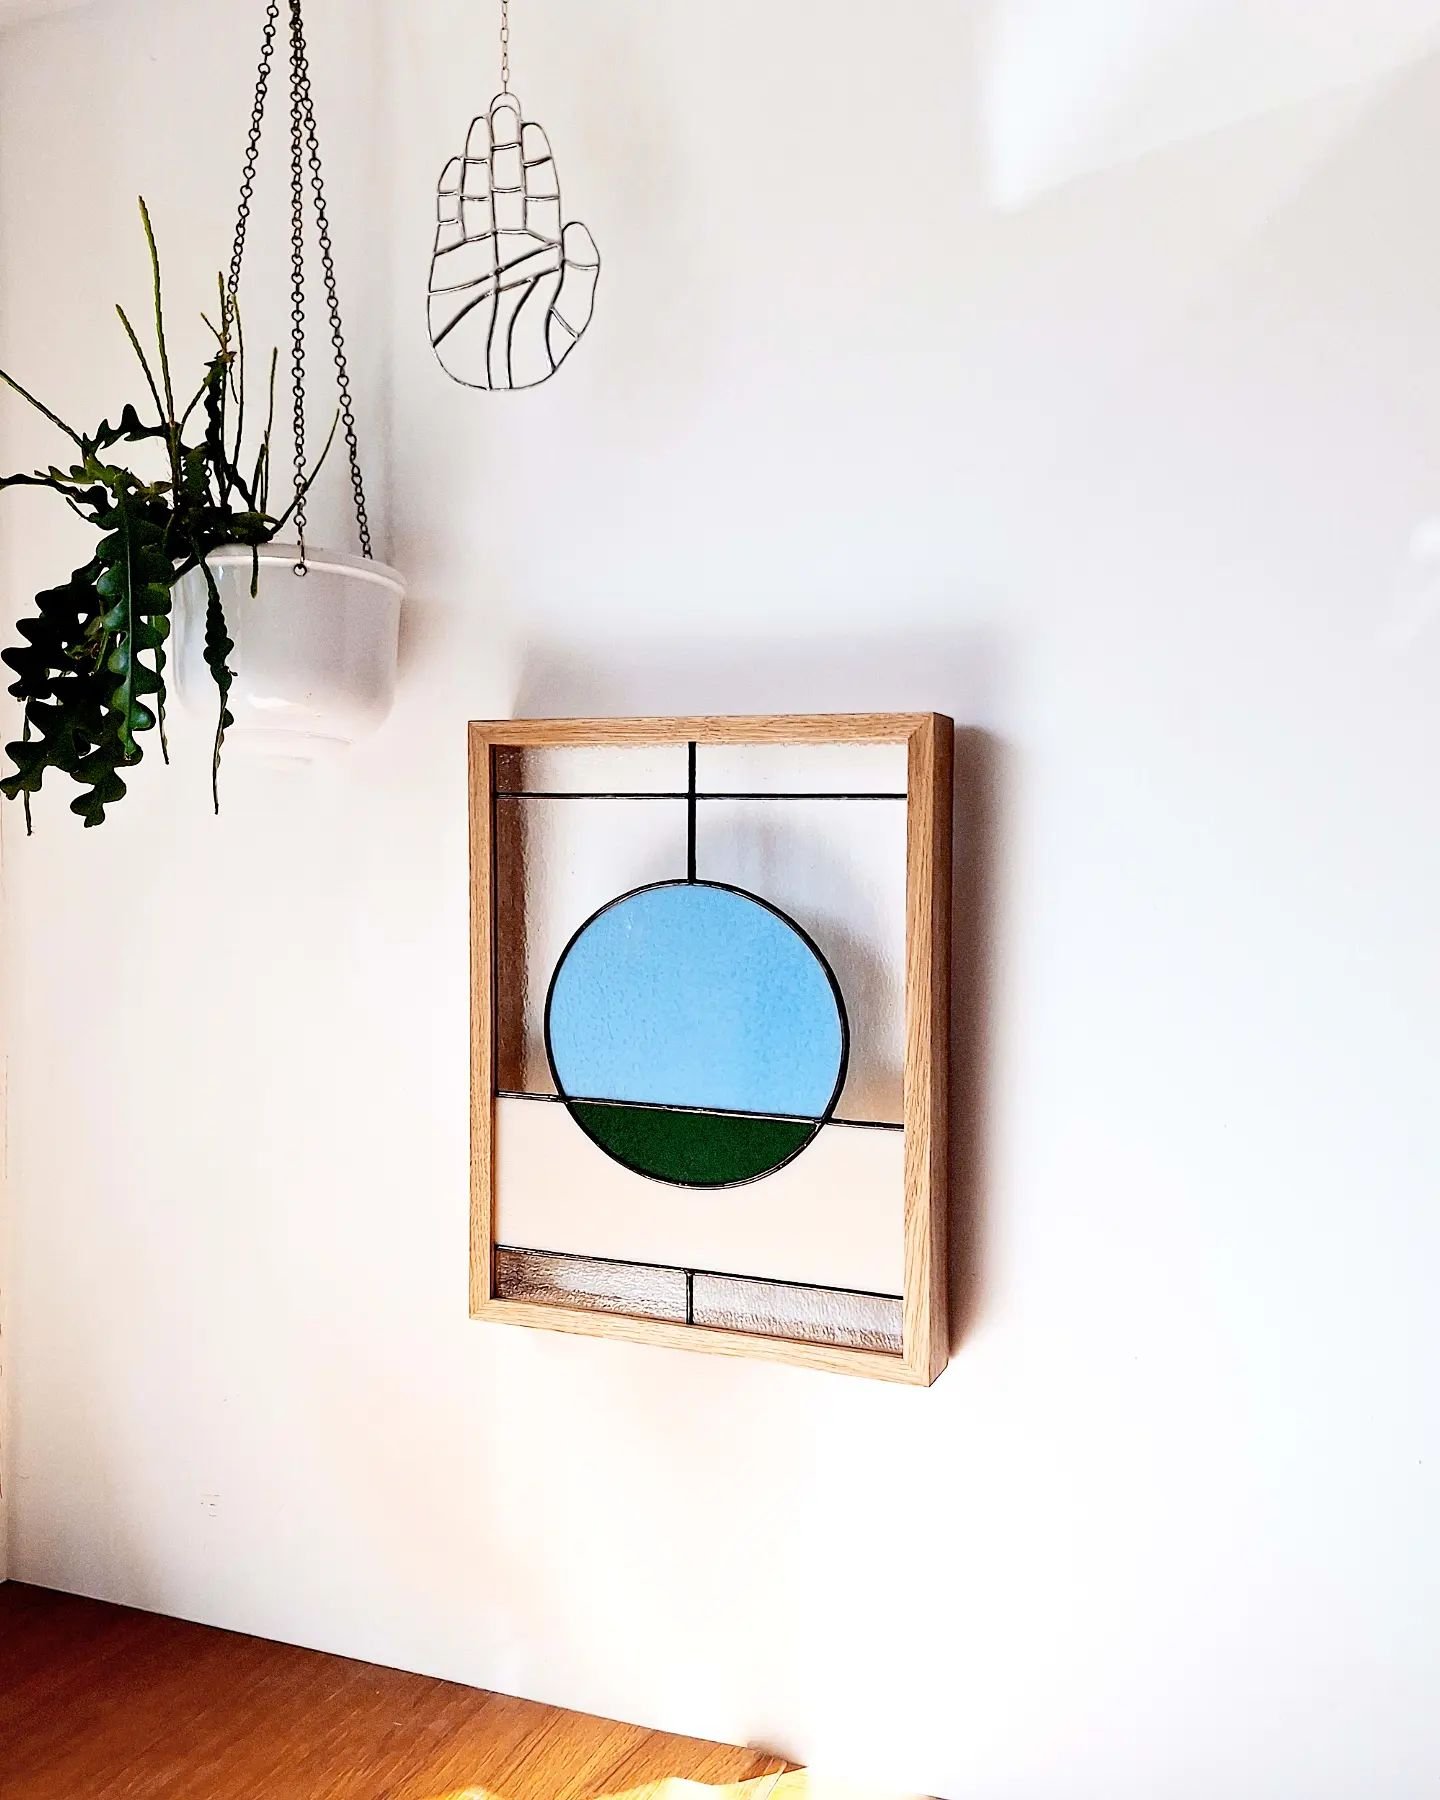 INERTIA 
〰️
Glass in oak frame
〰️
It's taken a while to get there, but I'm confident about this new road I'm on, joining two loves of my life in graphic precision and detail.
〰️
Glass panel honors the tradition of panels but with a contemporary take,